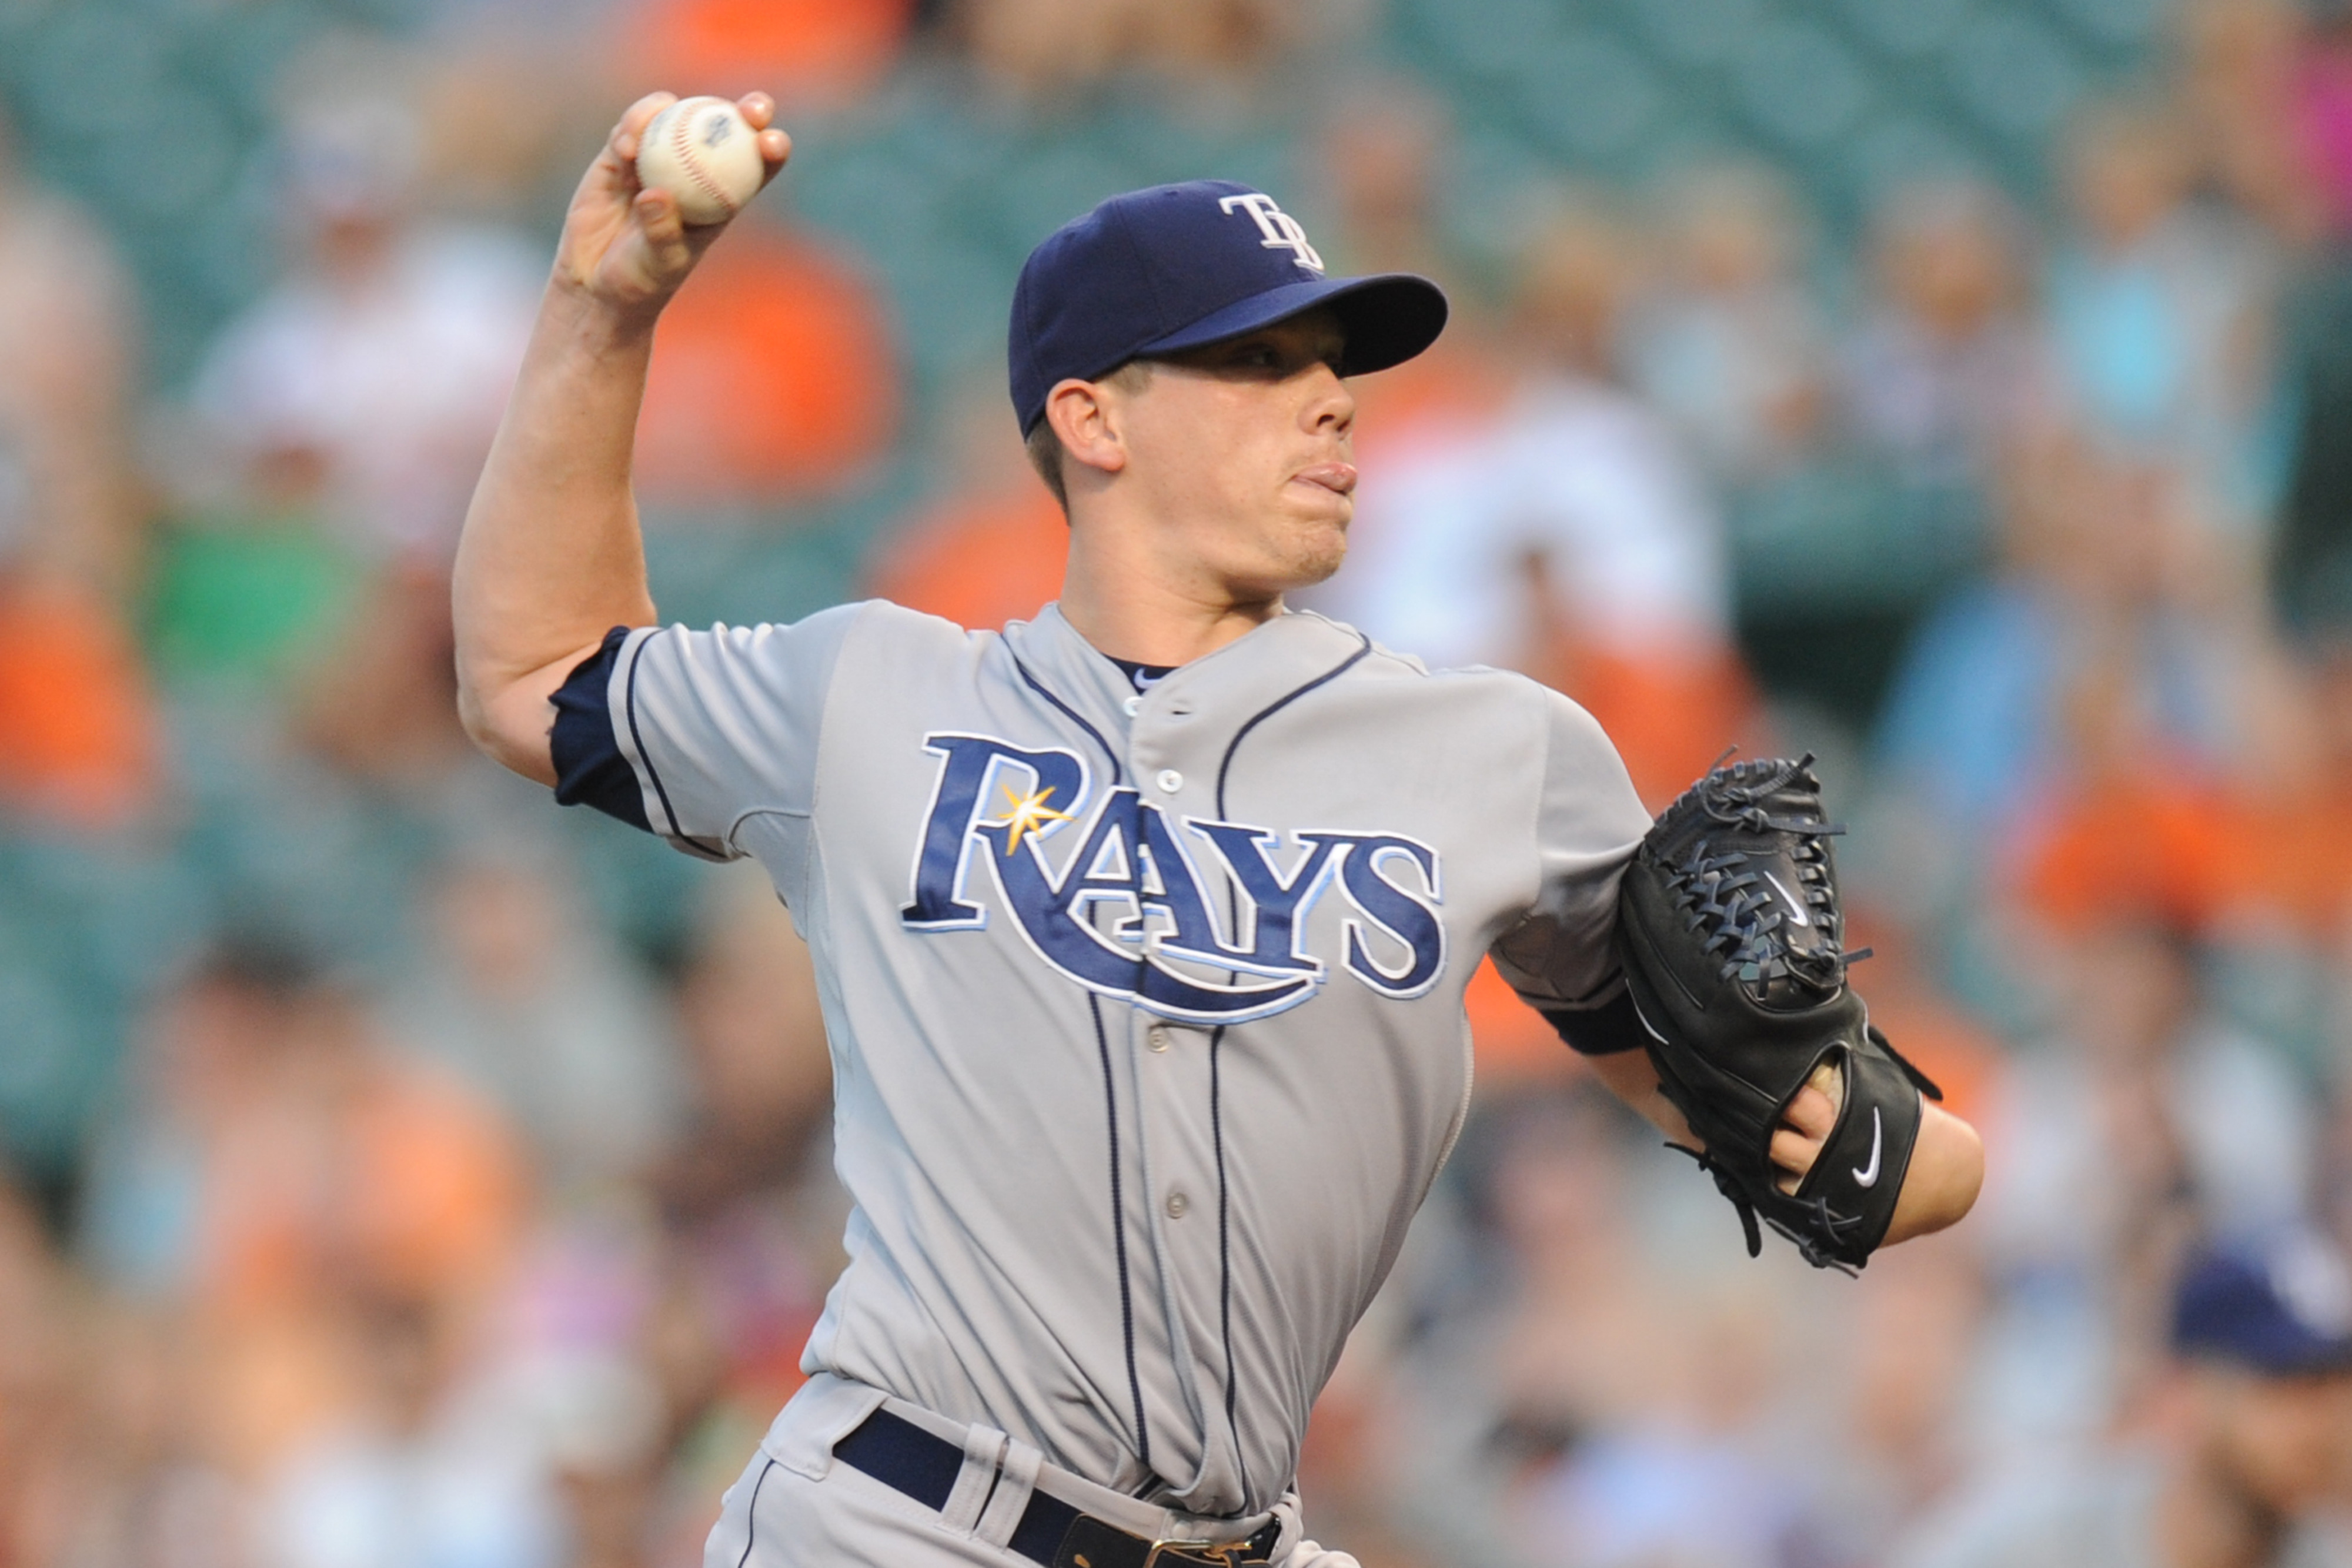 BALTIMORE, MD - JULY 24:  Jeremy Hellickson #58 of the Tampa Bay Rays pitches during a baseball game against the Baltimore Orioles on July 24, 2012 at Oriole Park at Camden Yards in Baltimore, Maryland.  (Photo by Mitchell Layton/Getty Images)